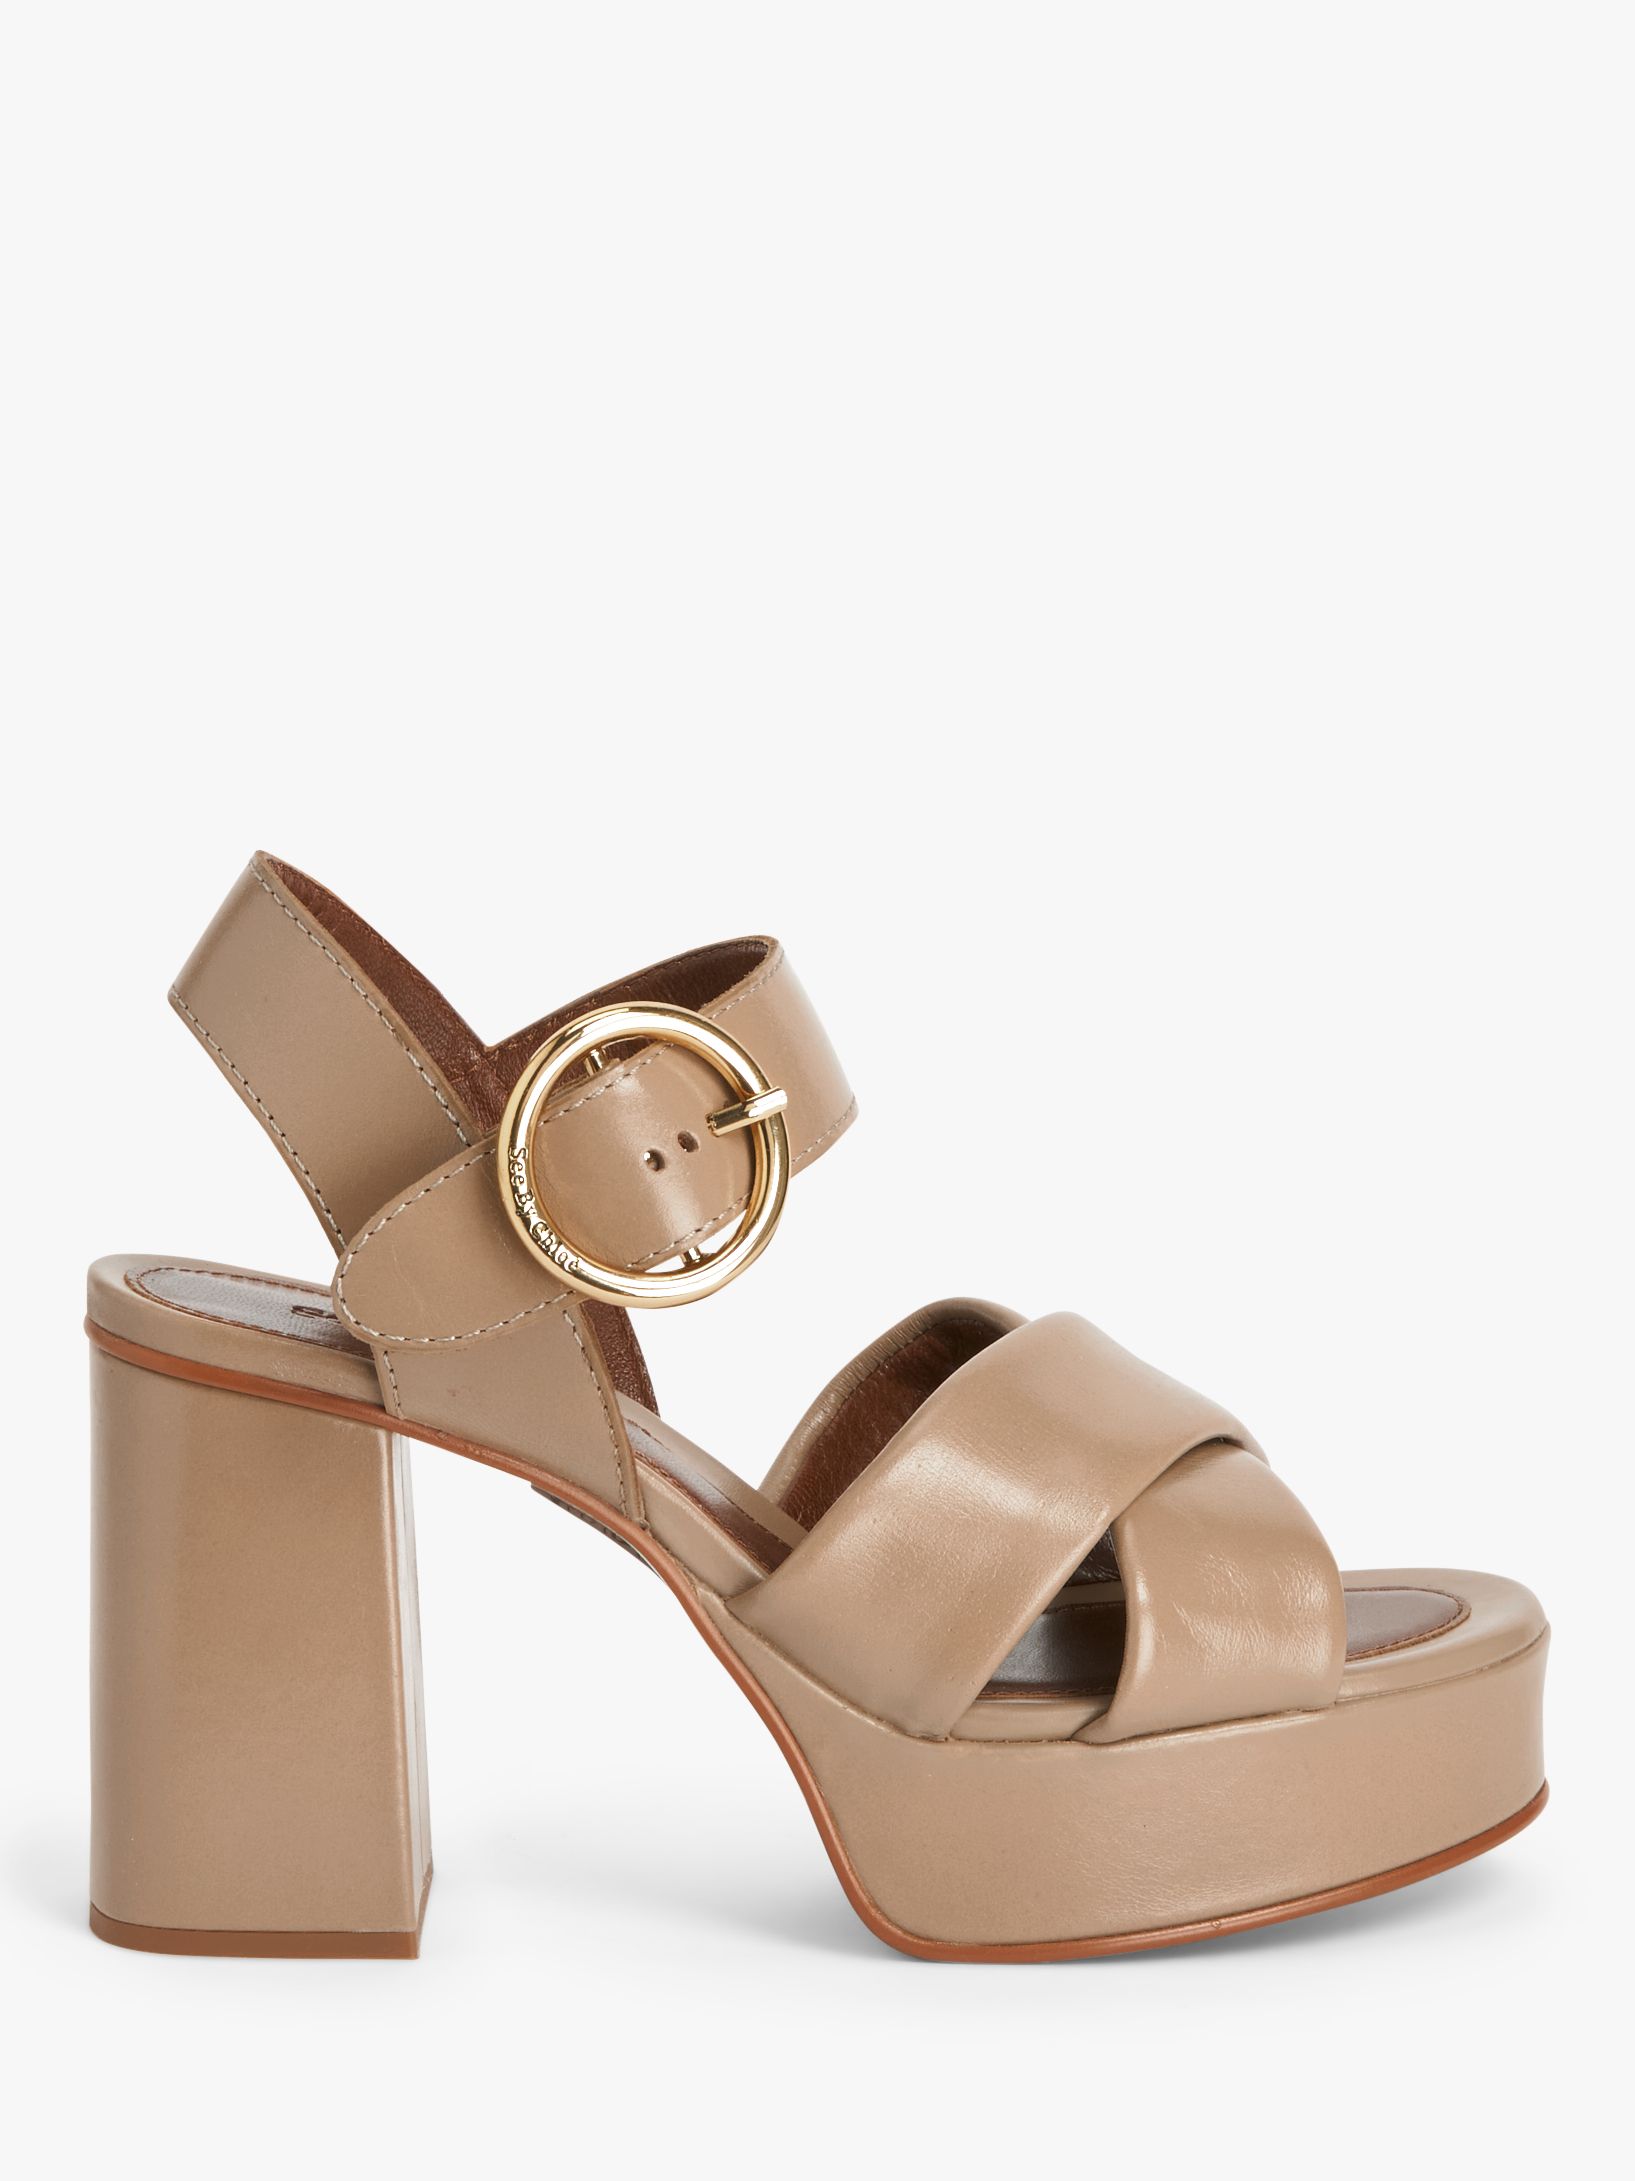 See By Chloé Lyna Leather Platform Sandals, Beige, 4